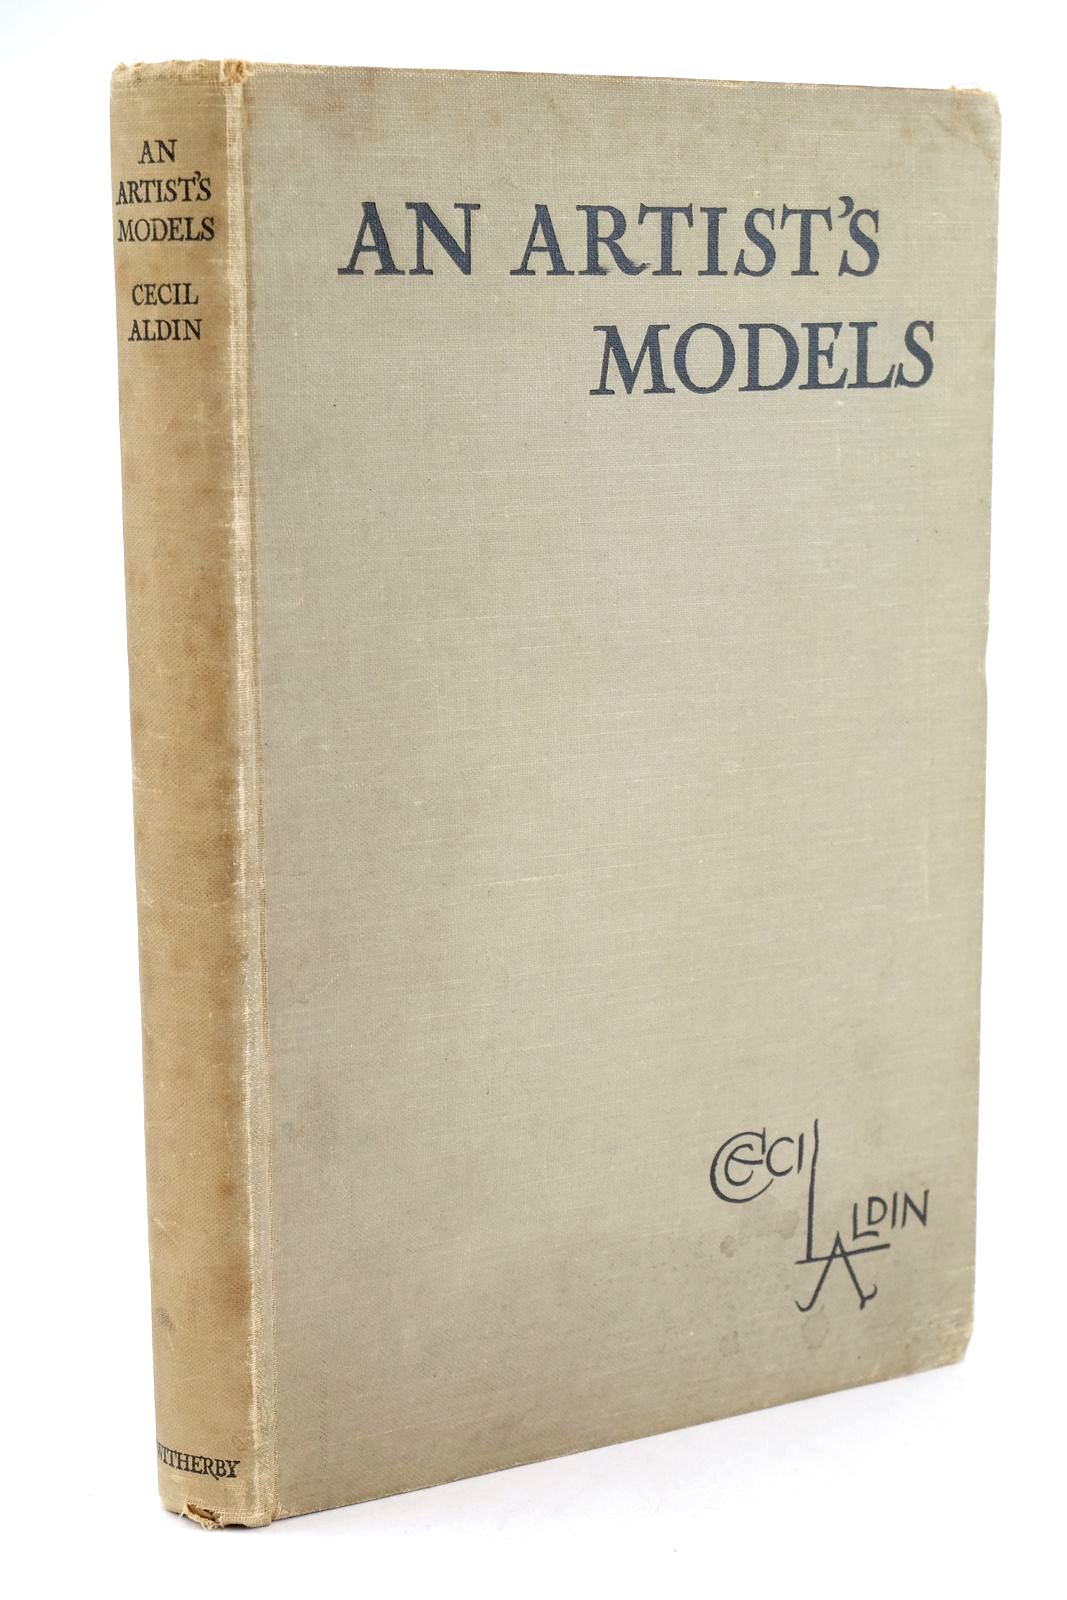 Photo of AN ARTIST'S MODELS written by Aldin, Cecil illustrated by Aldin, Cecil published by H. F. & G. Witherby (STOCK CODE: 1323856)  for sale by Stella & Rose's Books